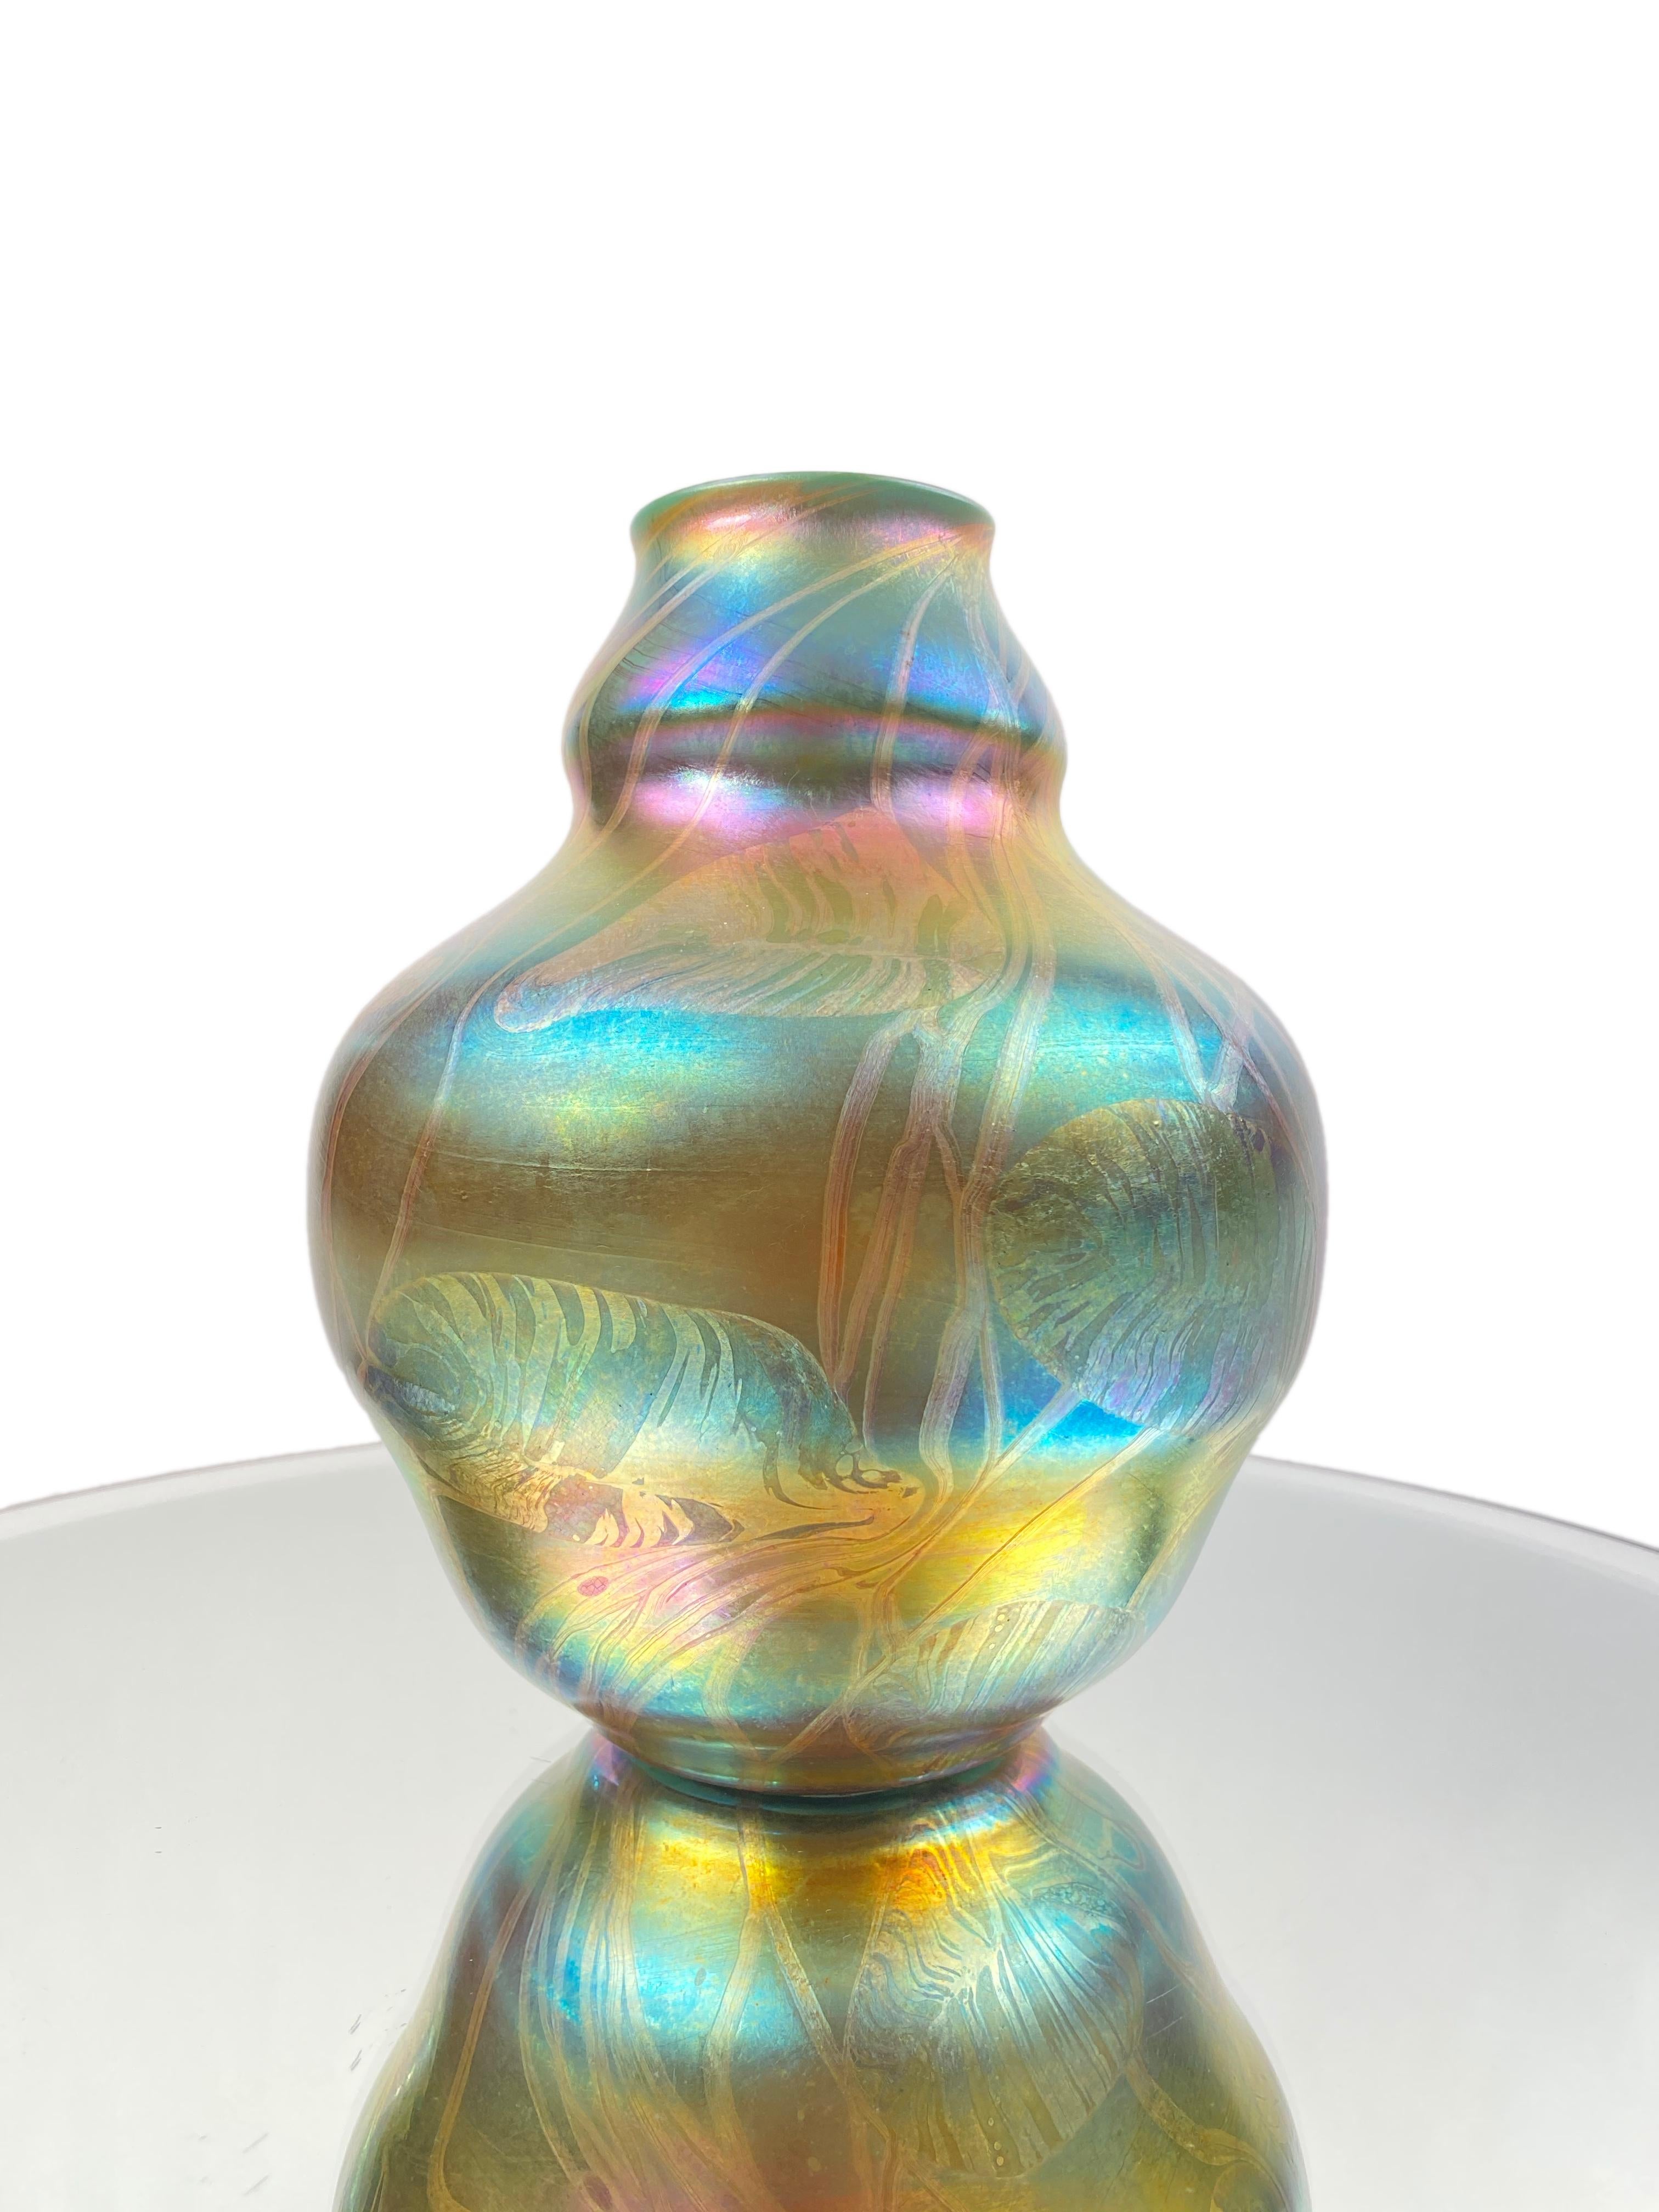 A fine and rare American Art Nouveau blown Tiffany Favrile “Leaf & Vine” vase by, Tiffany Studios decorated with highly iridescent and beautifully detailed leaf and vine decoration against a heavily iridized blue background. The vase is signed,